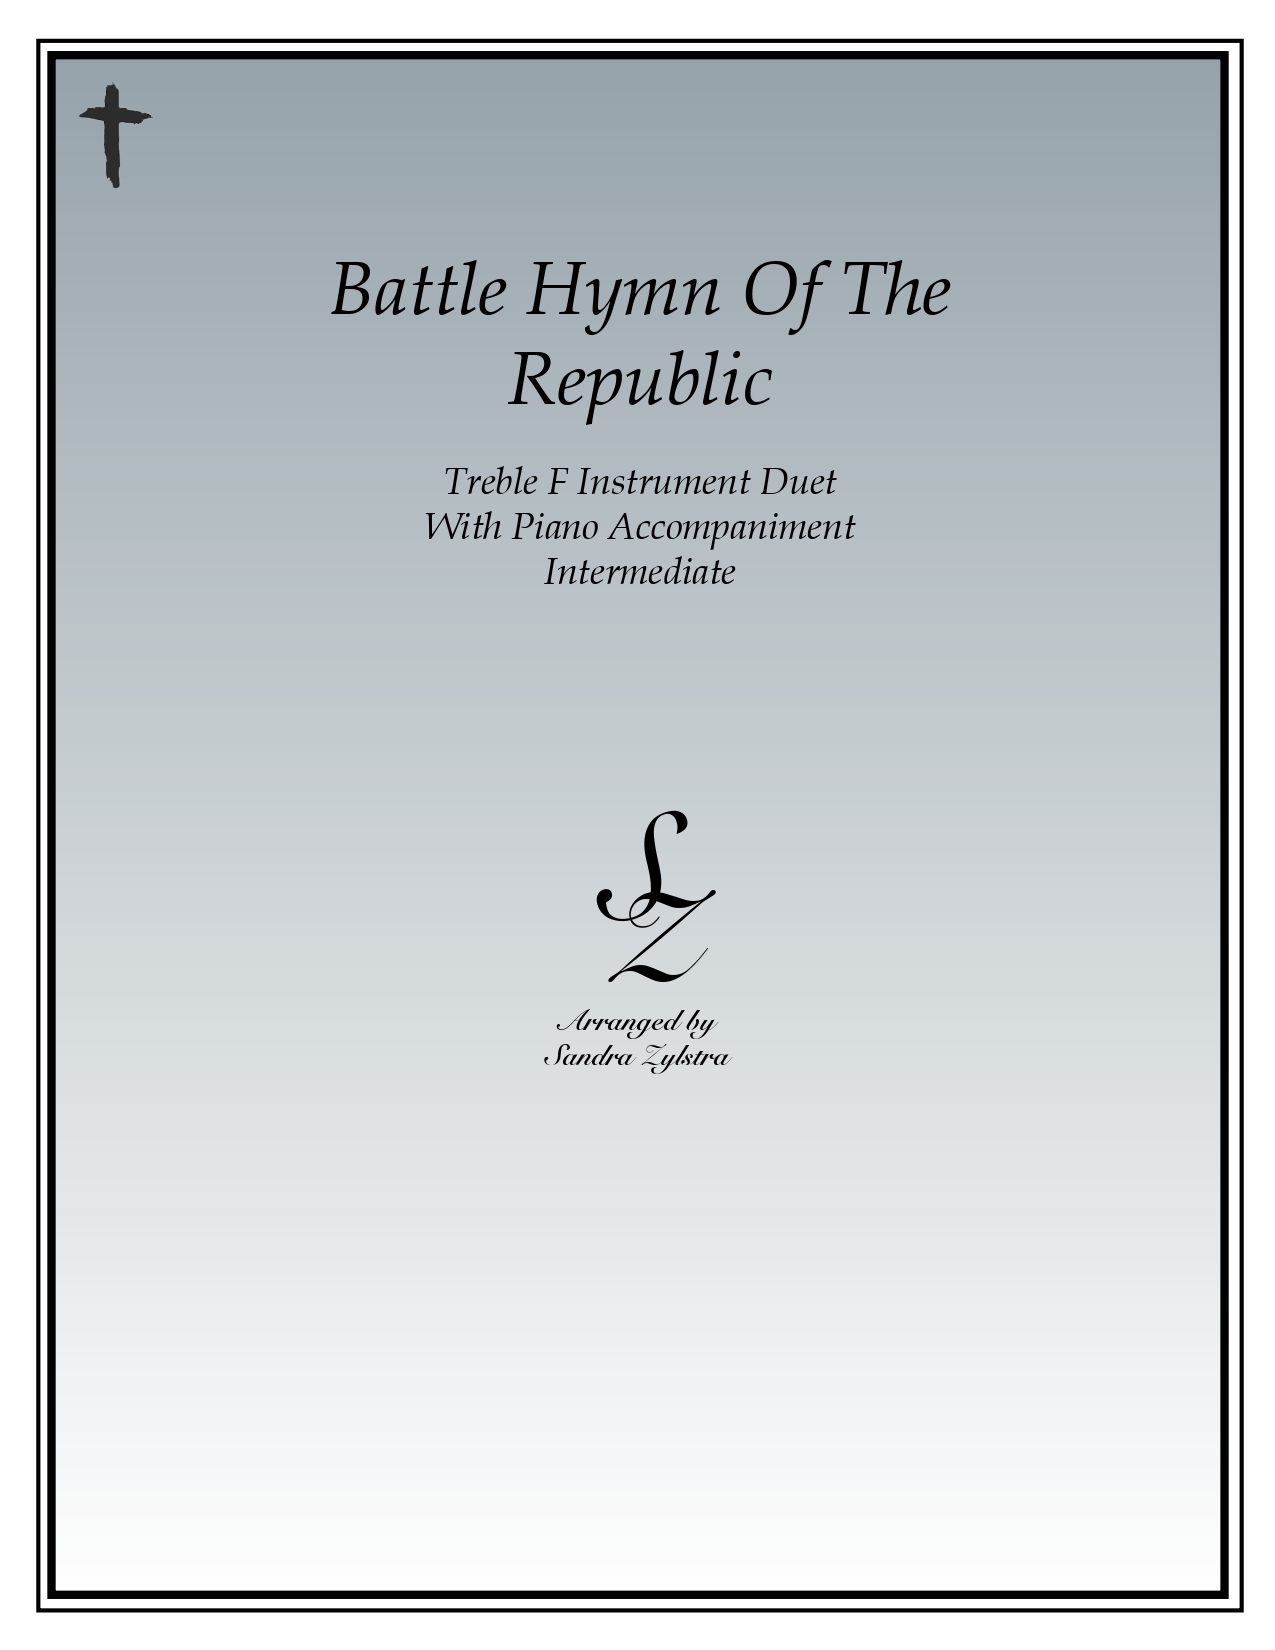 Battle Hymn Of The Republic F instrument duet parts cover page 00011